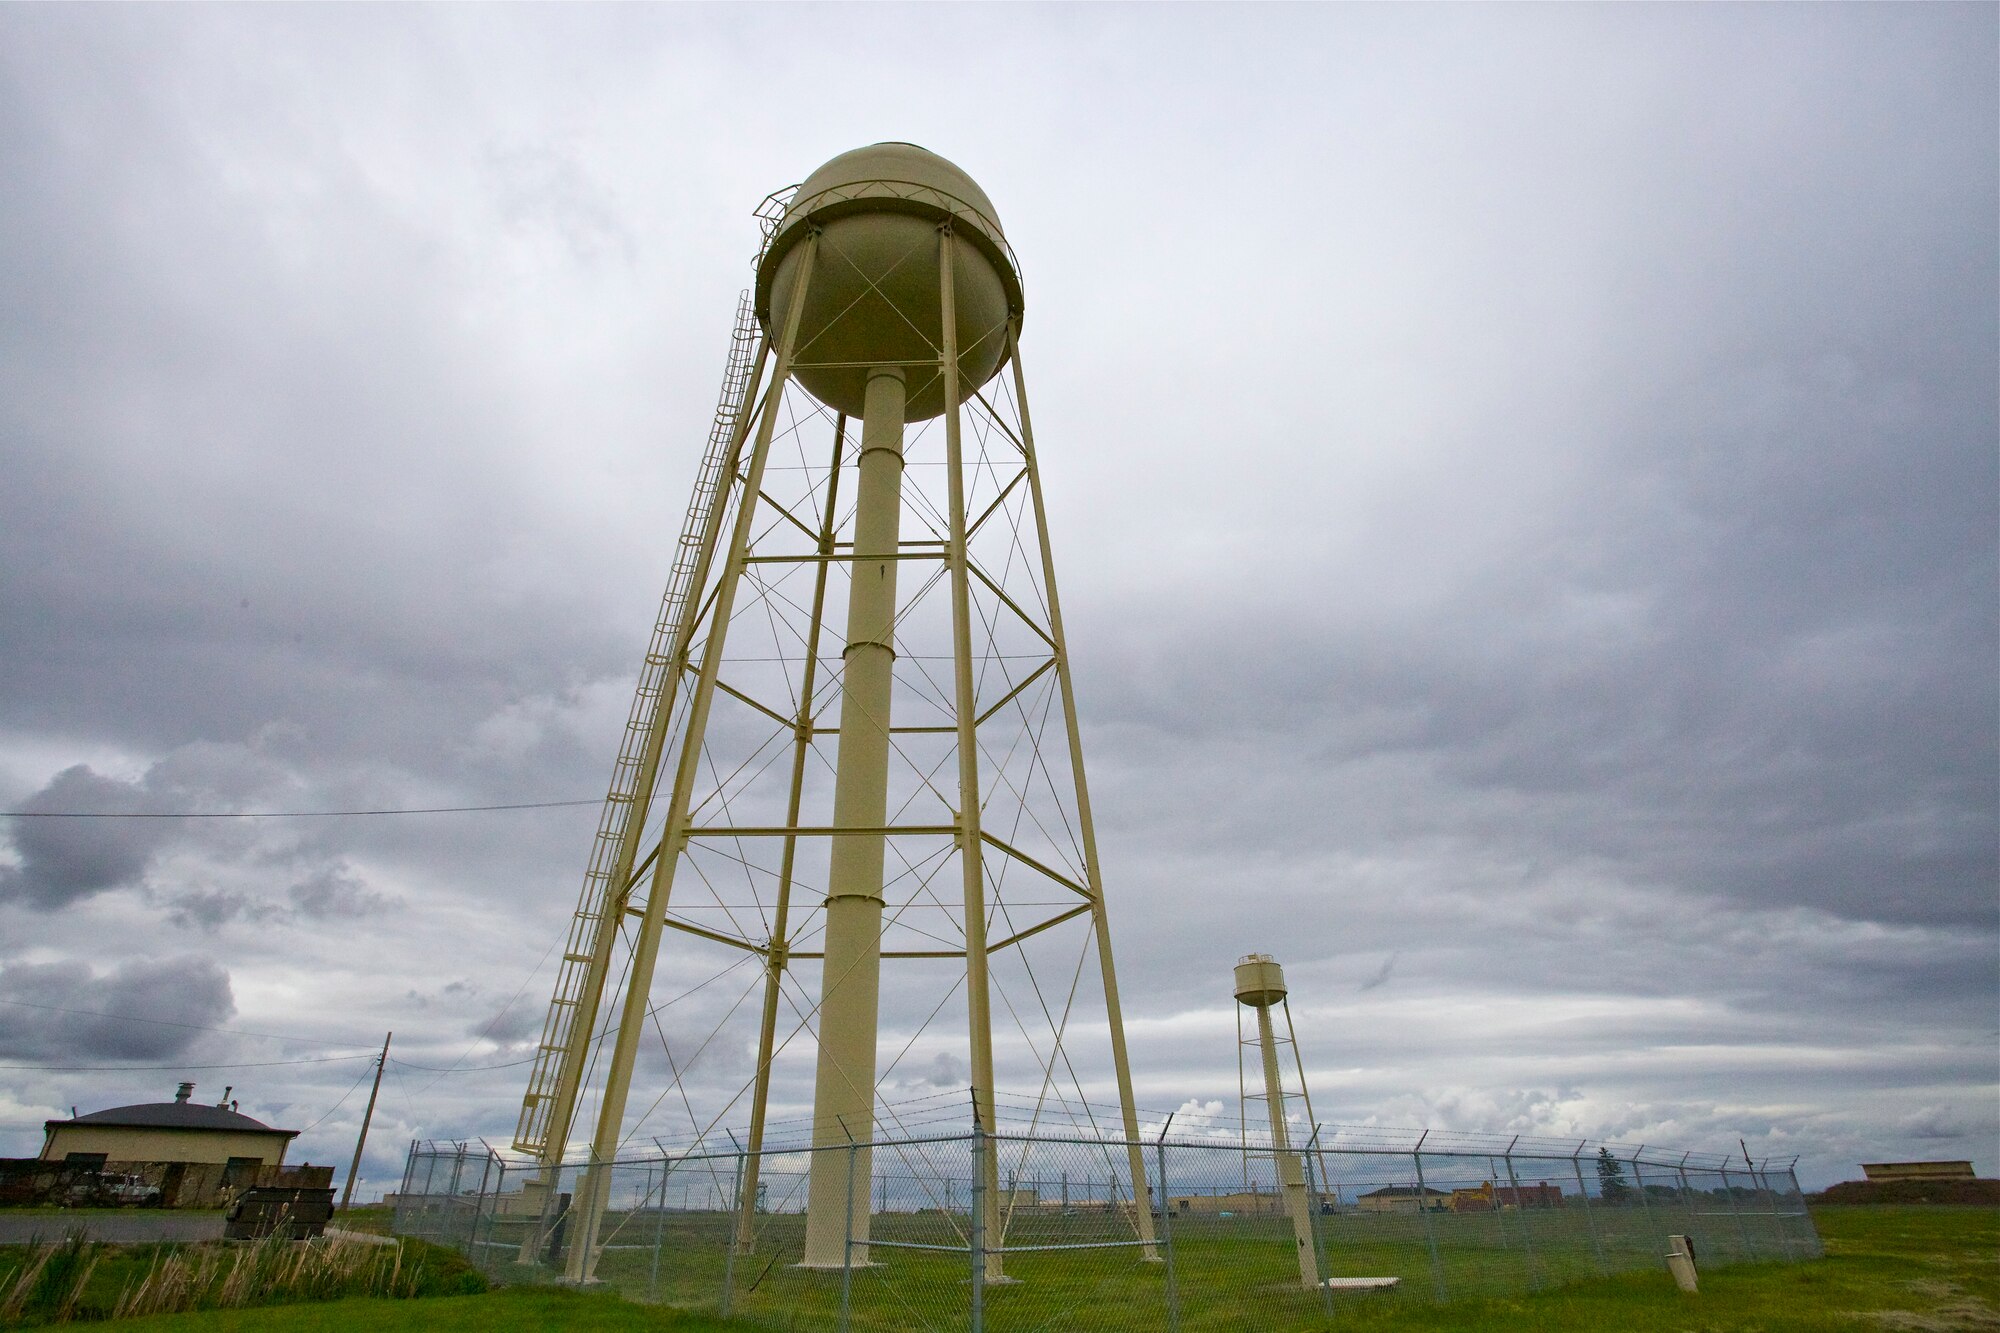 Repairing a 30-gallon-per-minute leak at this water tower at Fairchild AFB, Wash., helped save an estimated 15 million gallons of water per year. (U.S. Air Force photo/Eddie Green)